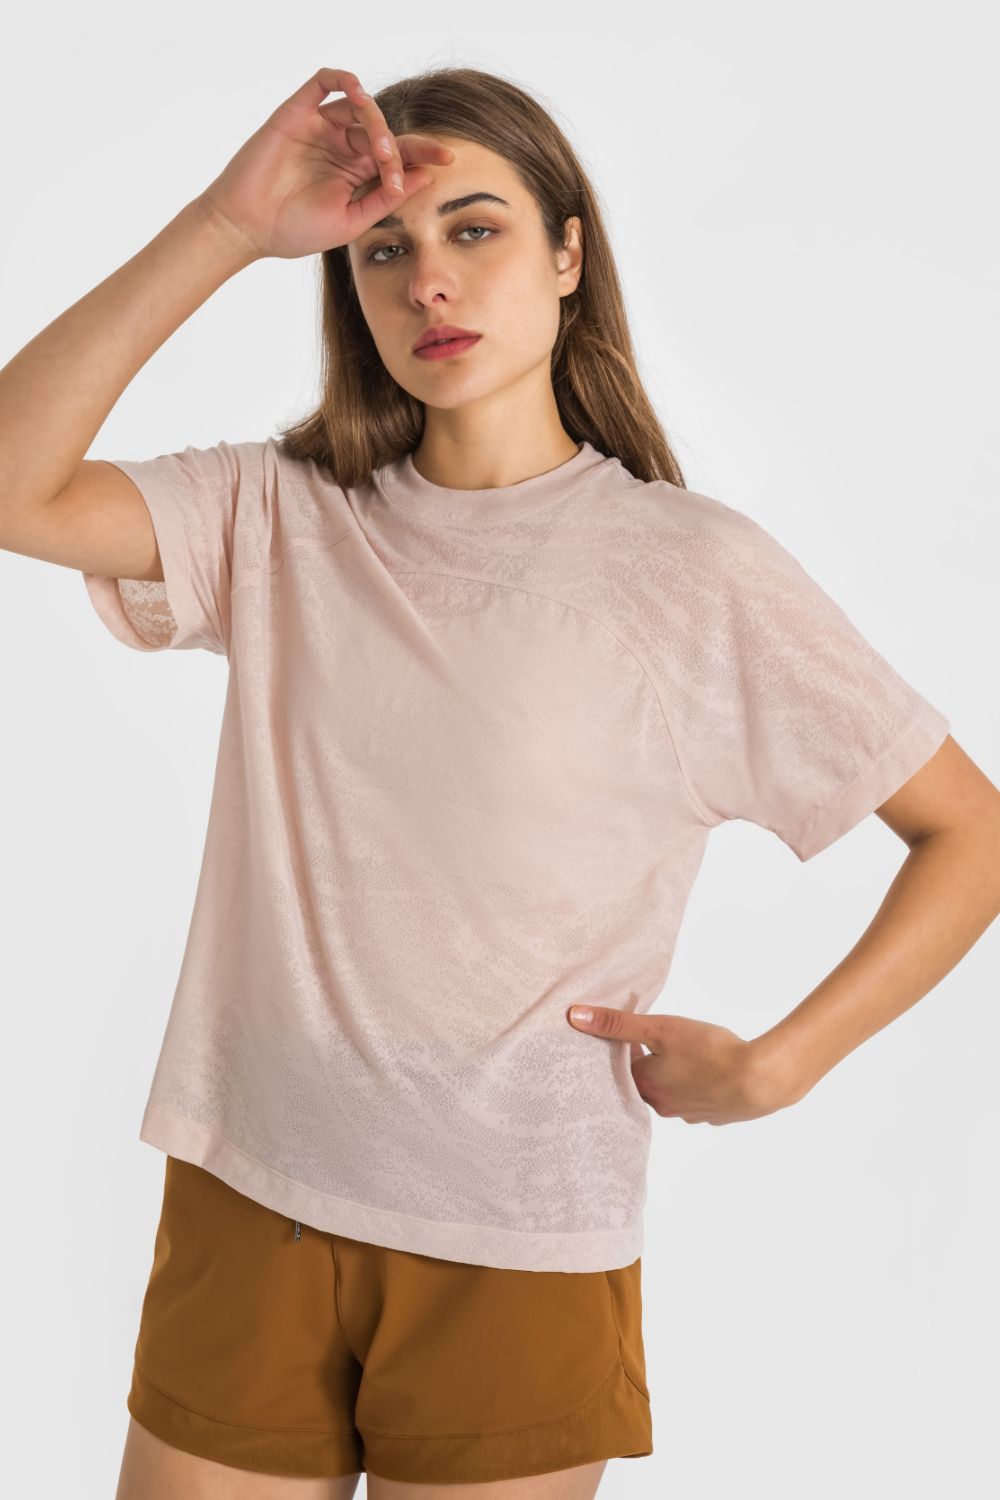 Breathable and Lightweight Short Sleeve Sports Top - Shah S. Sahota